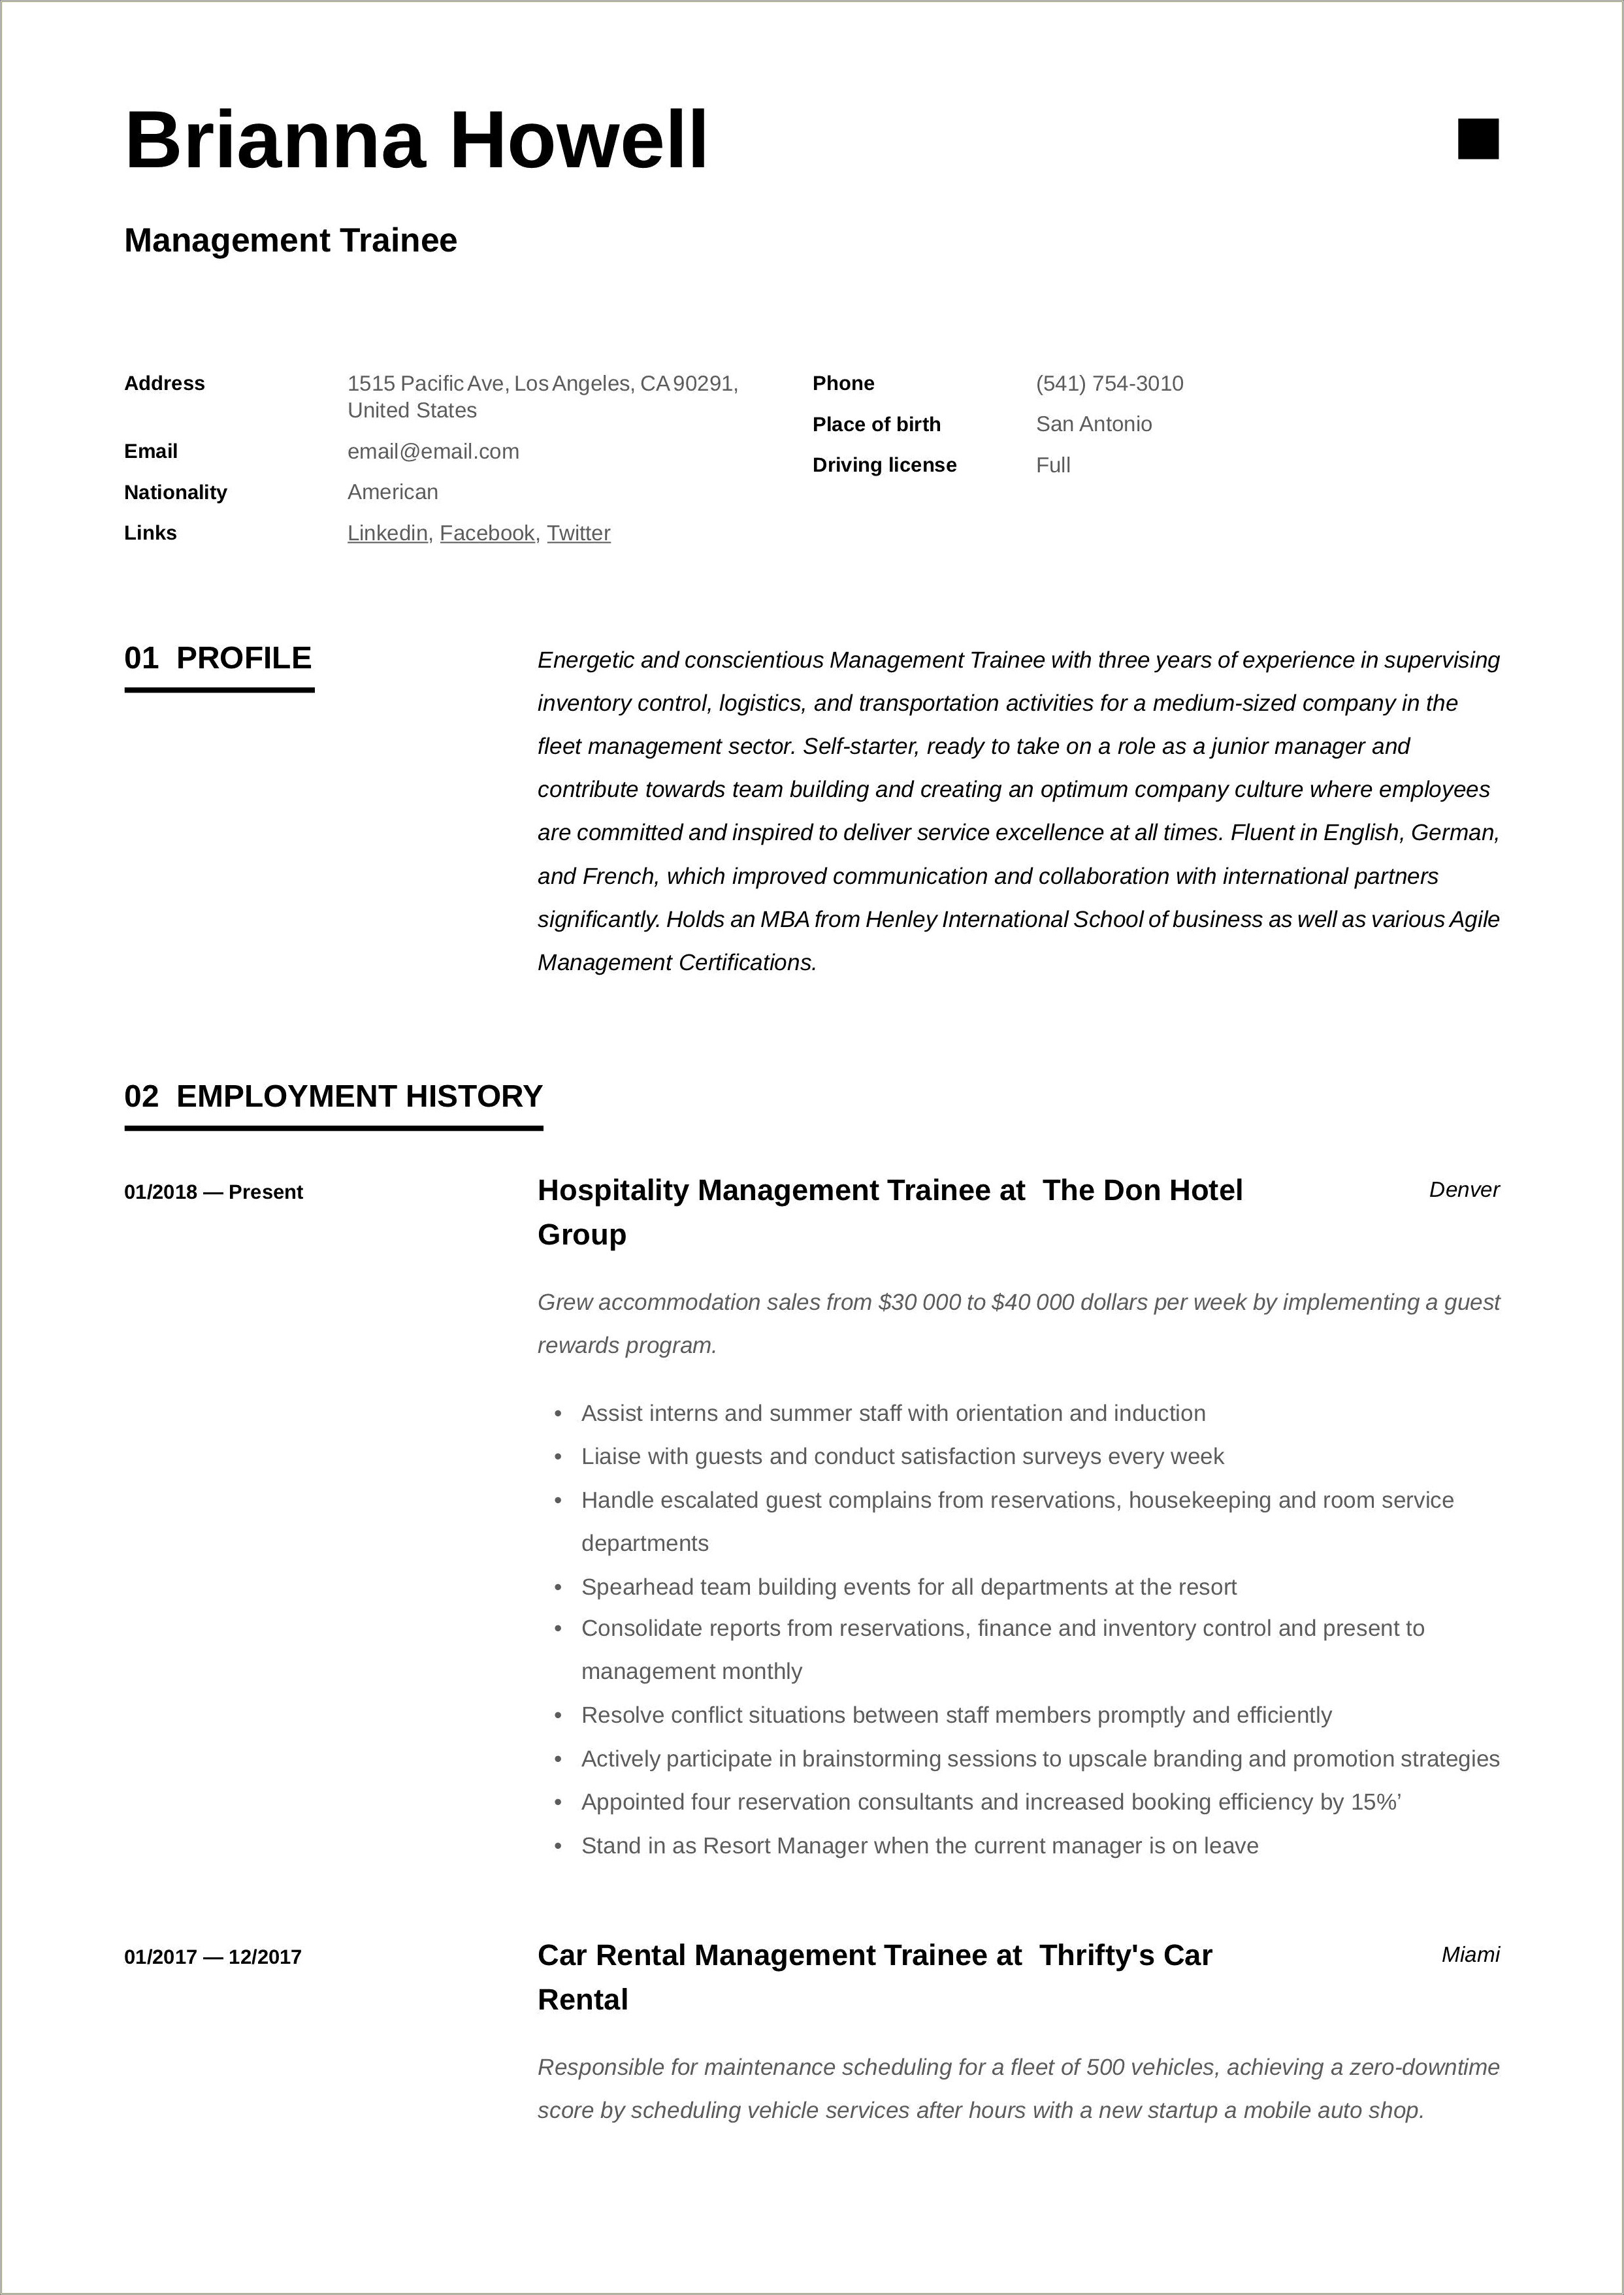 Resume For The Post Of Management Trainee